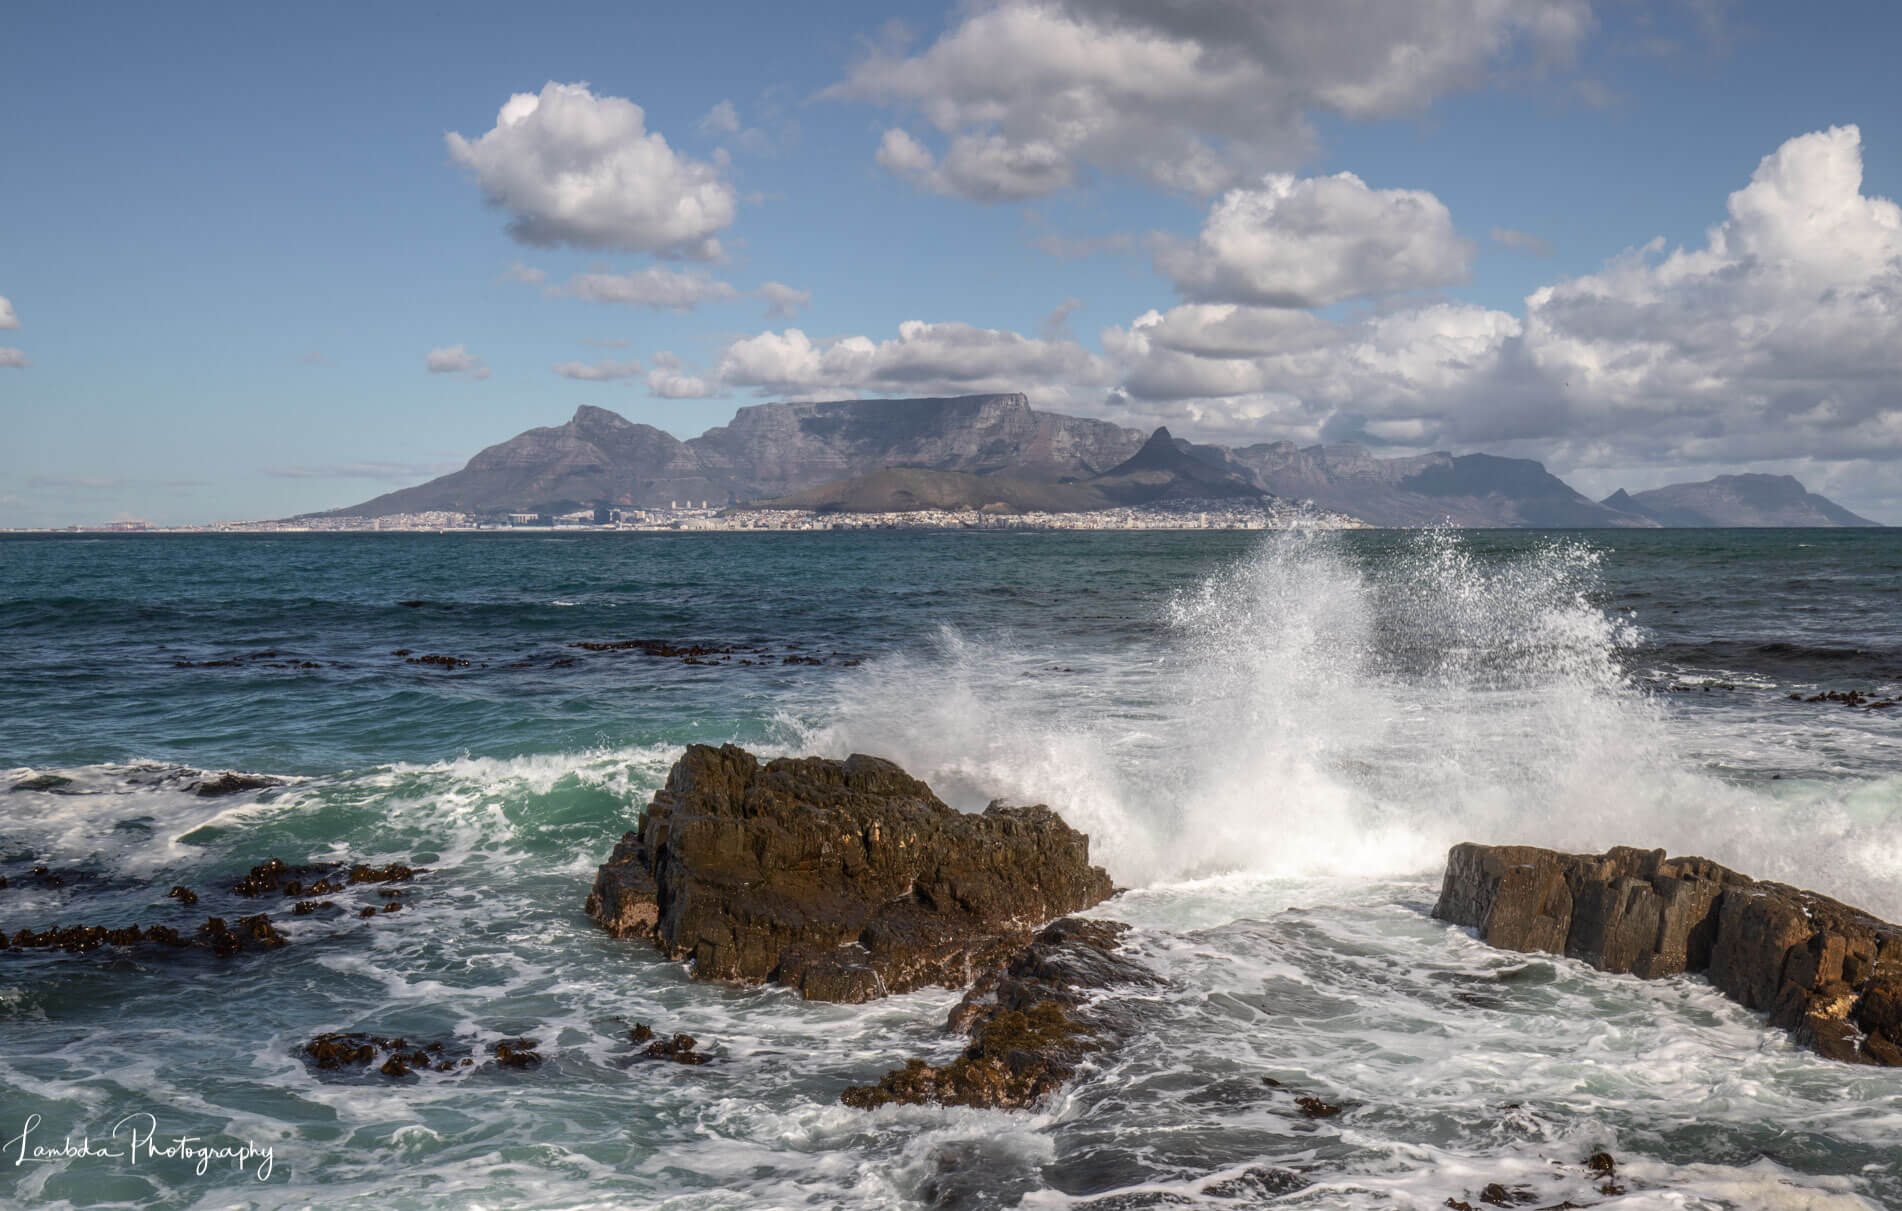 Photograph of the view of Table Mountain from Robben Island